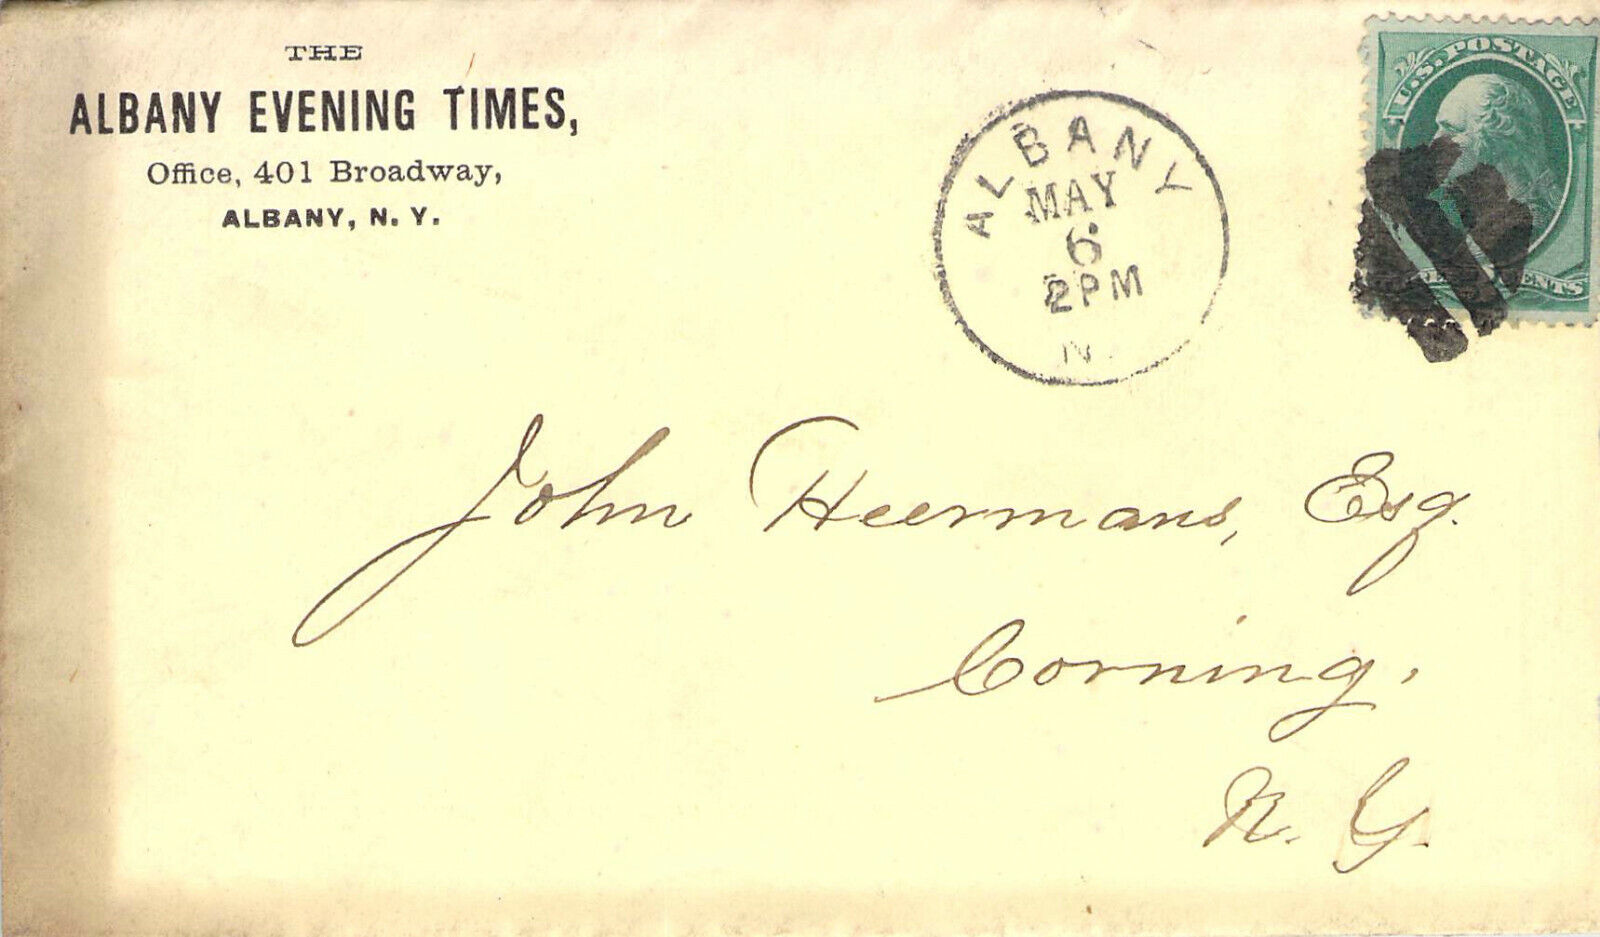 ALBANY EVENING TIMES NY COOL CANCEL POSTAL HISTORY COVER 